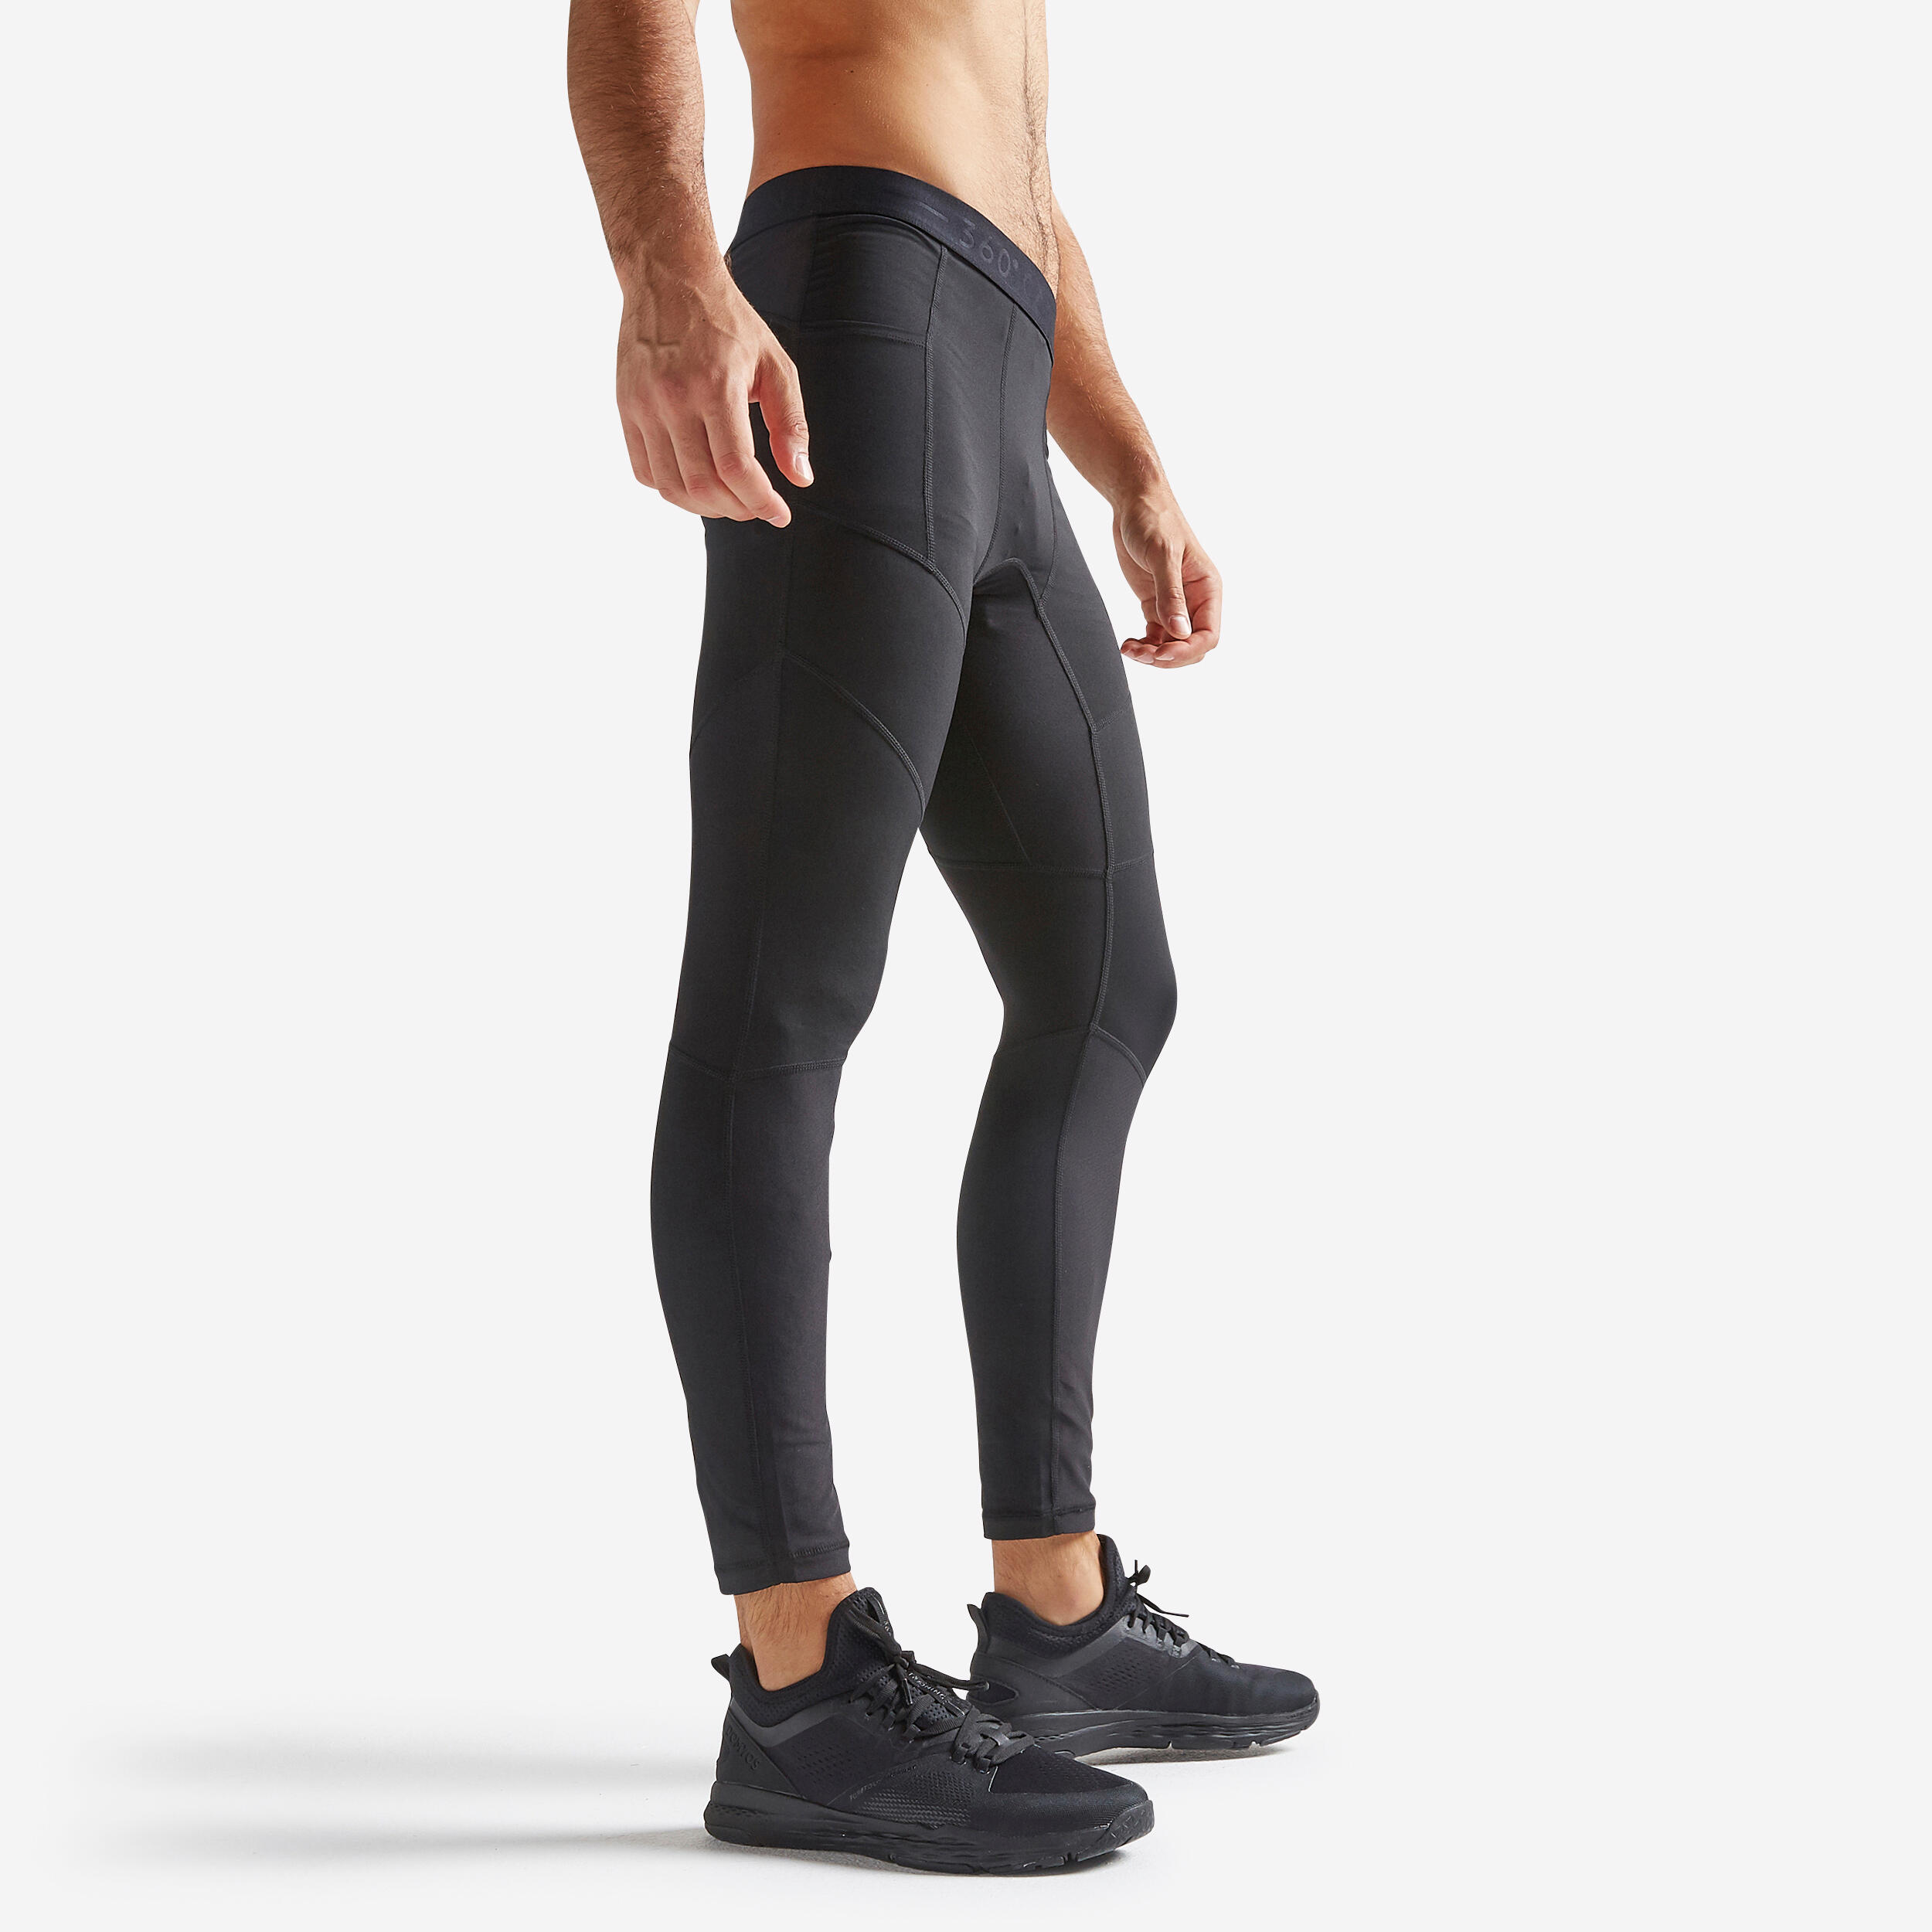 Shop Compression Tights Decathlon with great discounts and prices